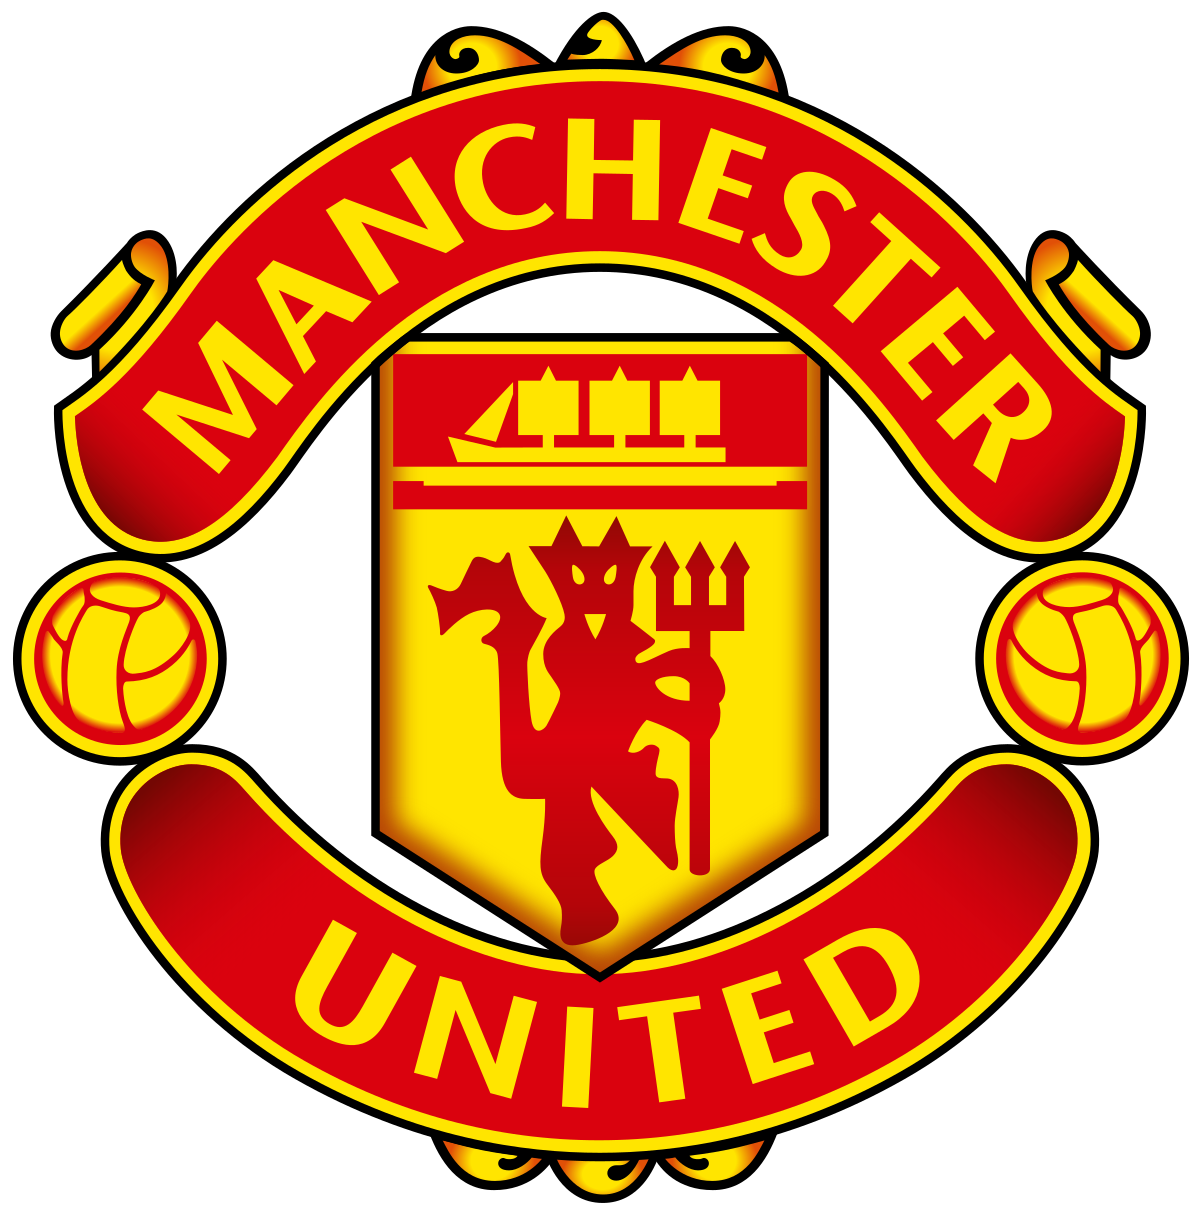 Profile picture of Man United